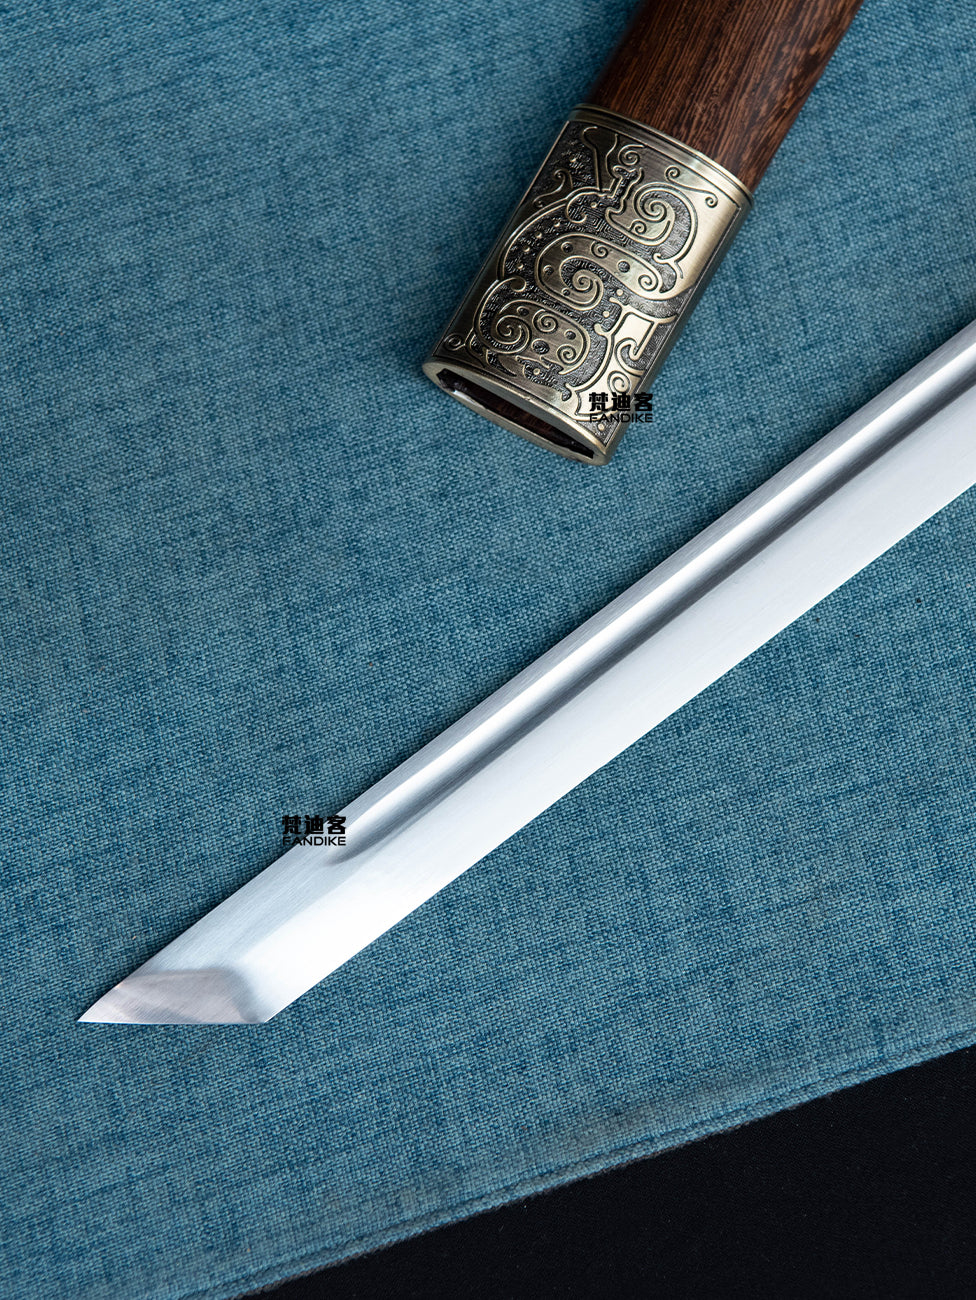 Straight knife Tang horizontal knife collection sword decorative sword